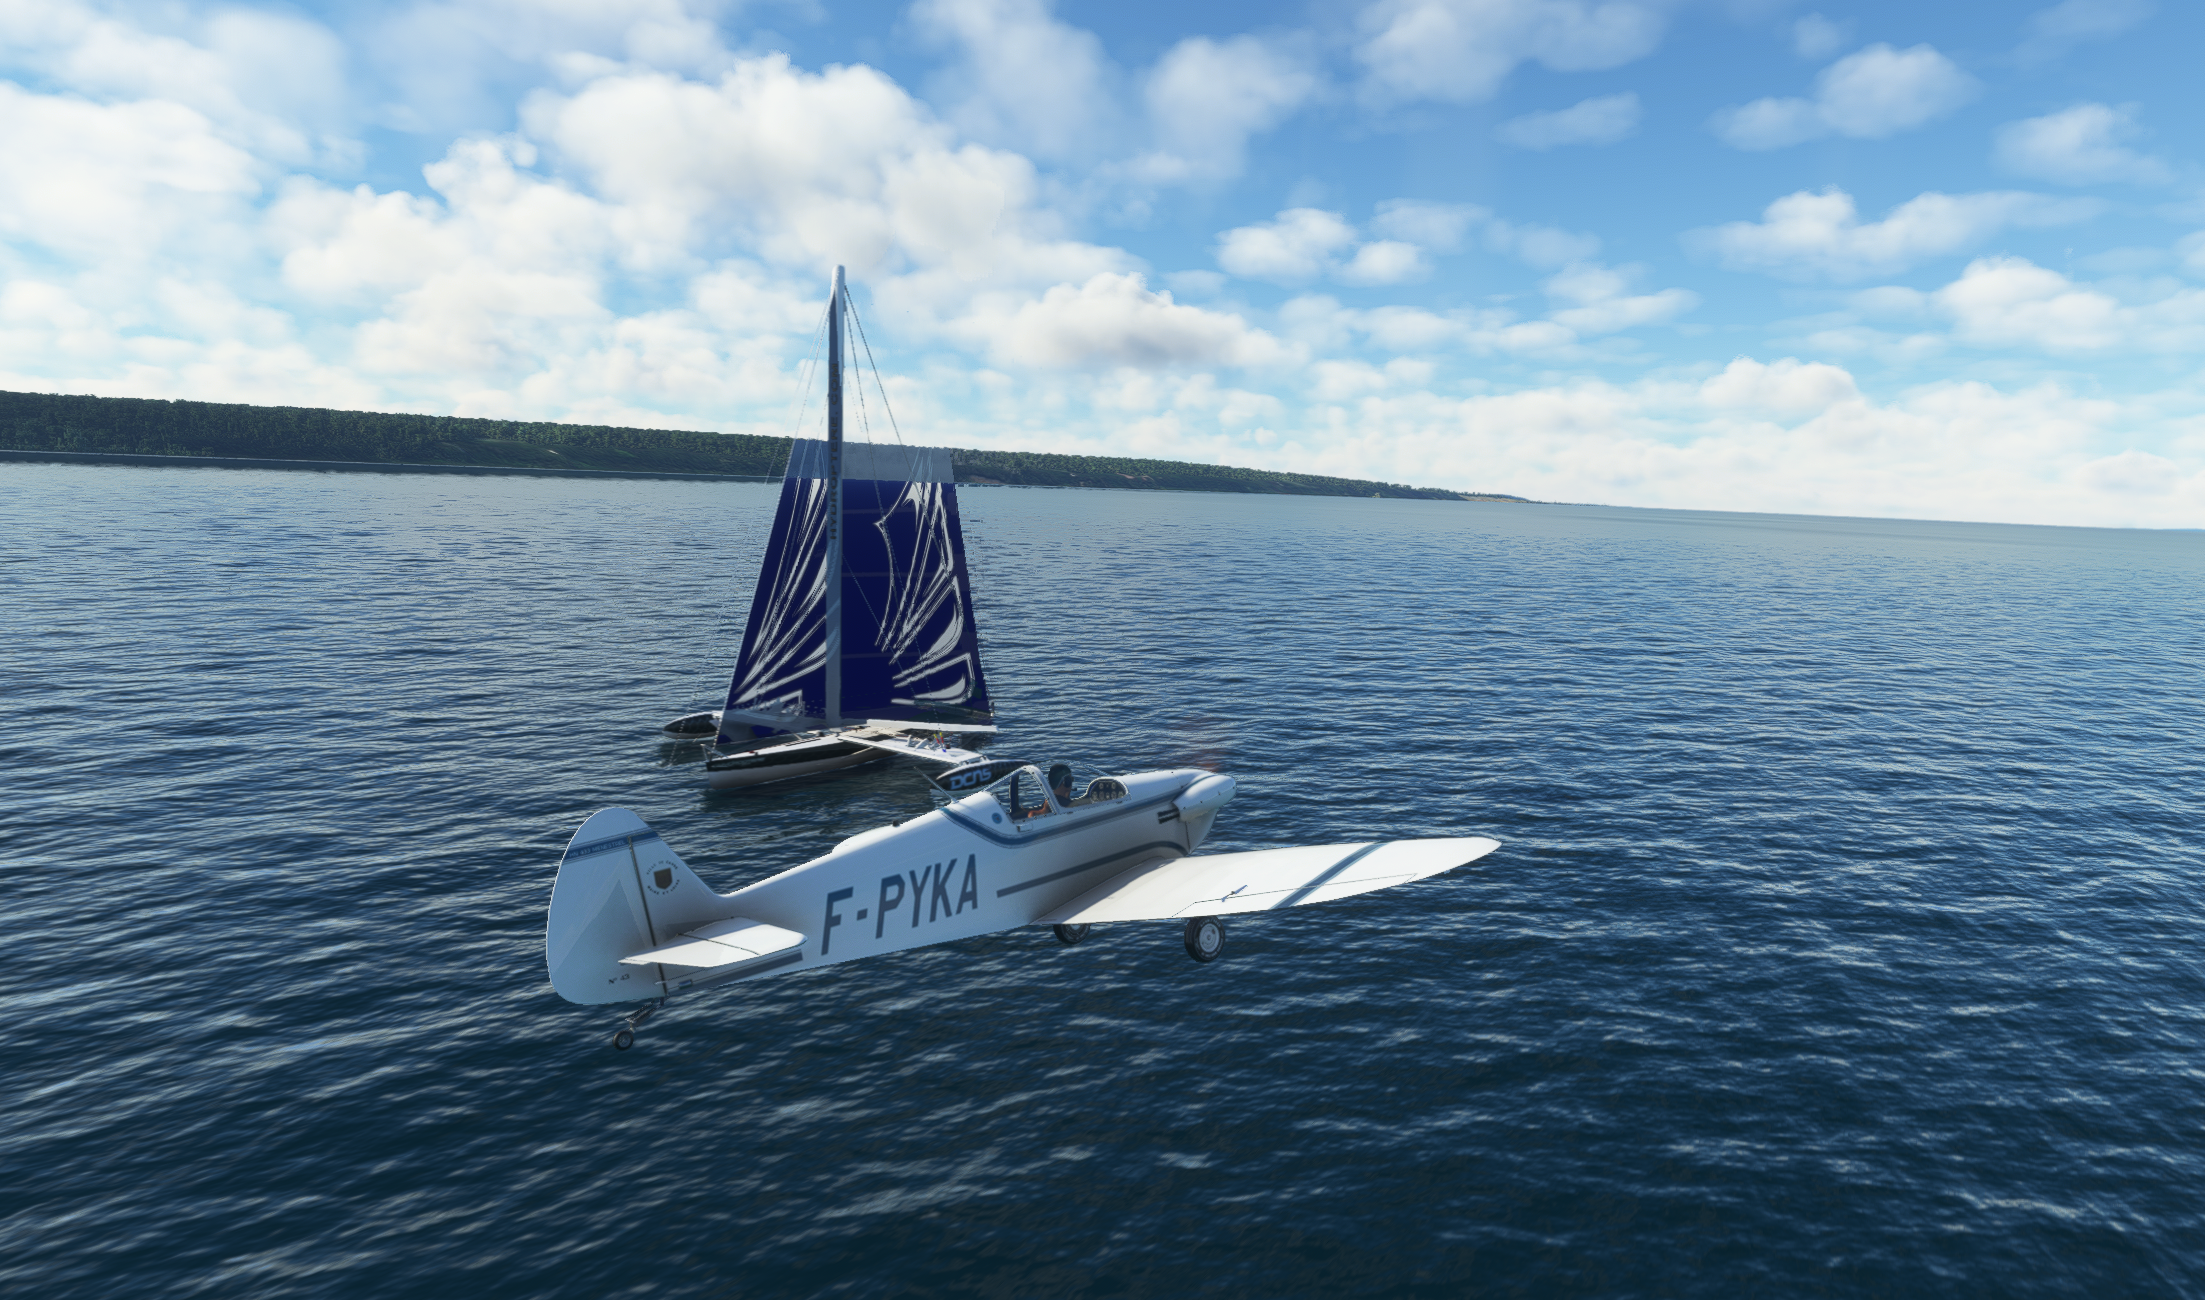 https://i.postimg.cc/BS10jbkN/MSFS-Hydroptere-Test-A.png